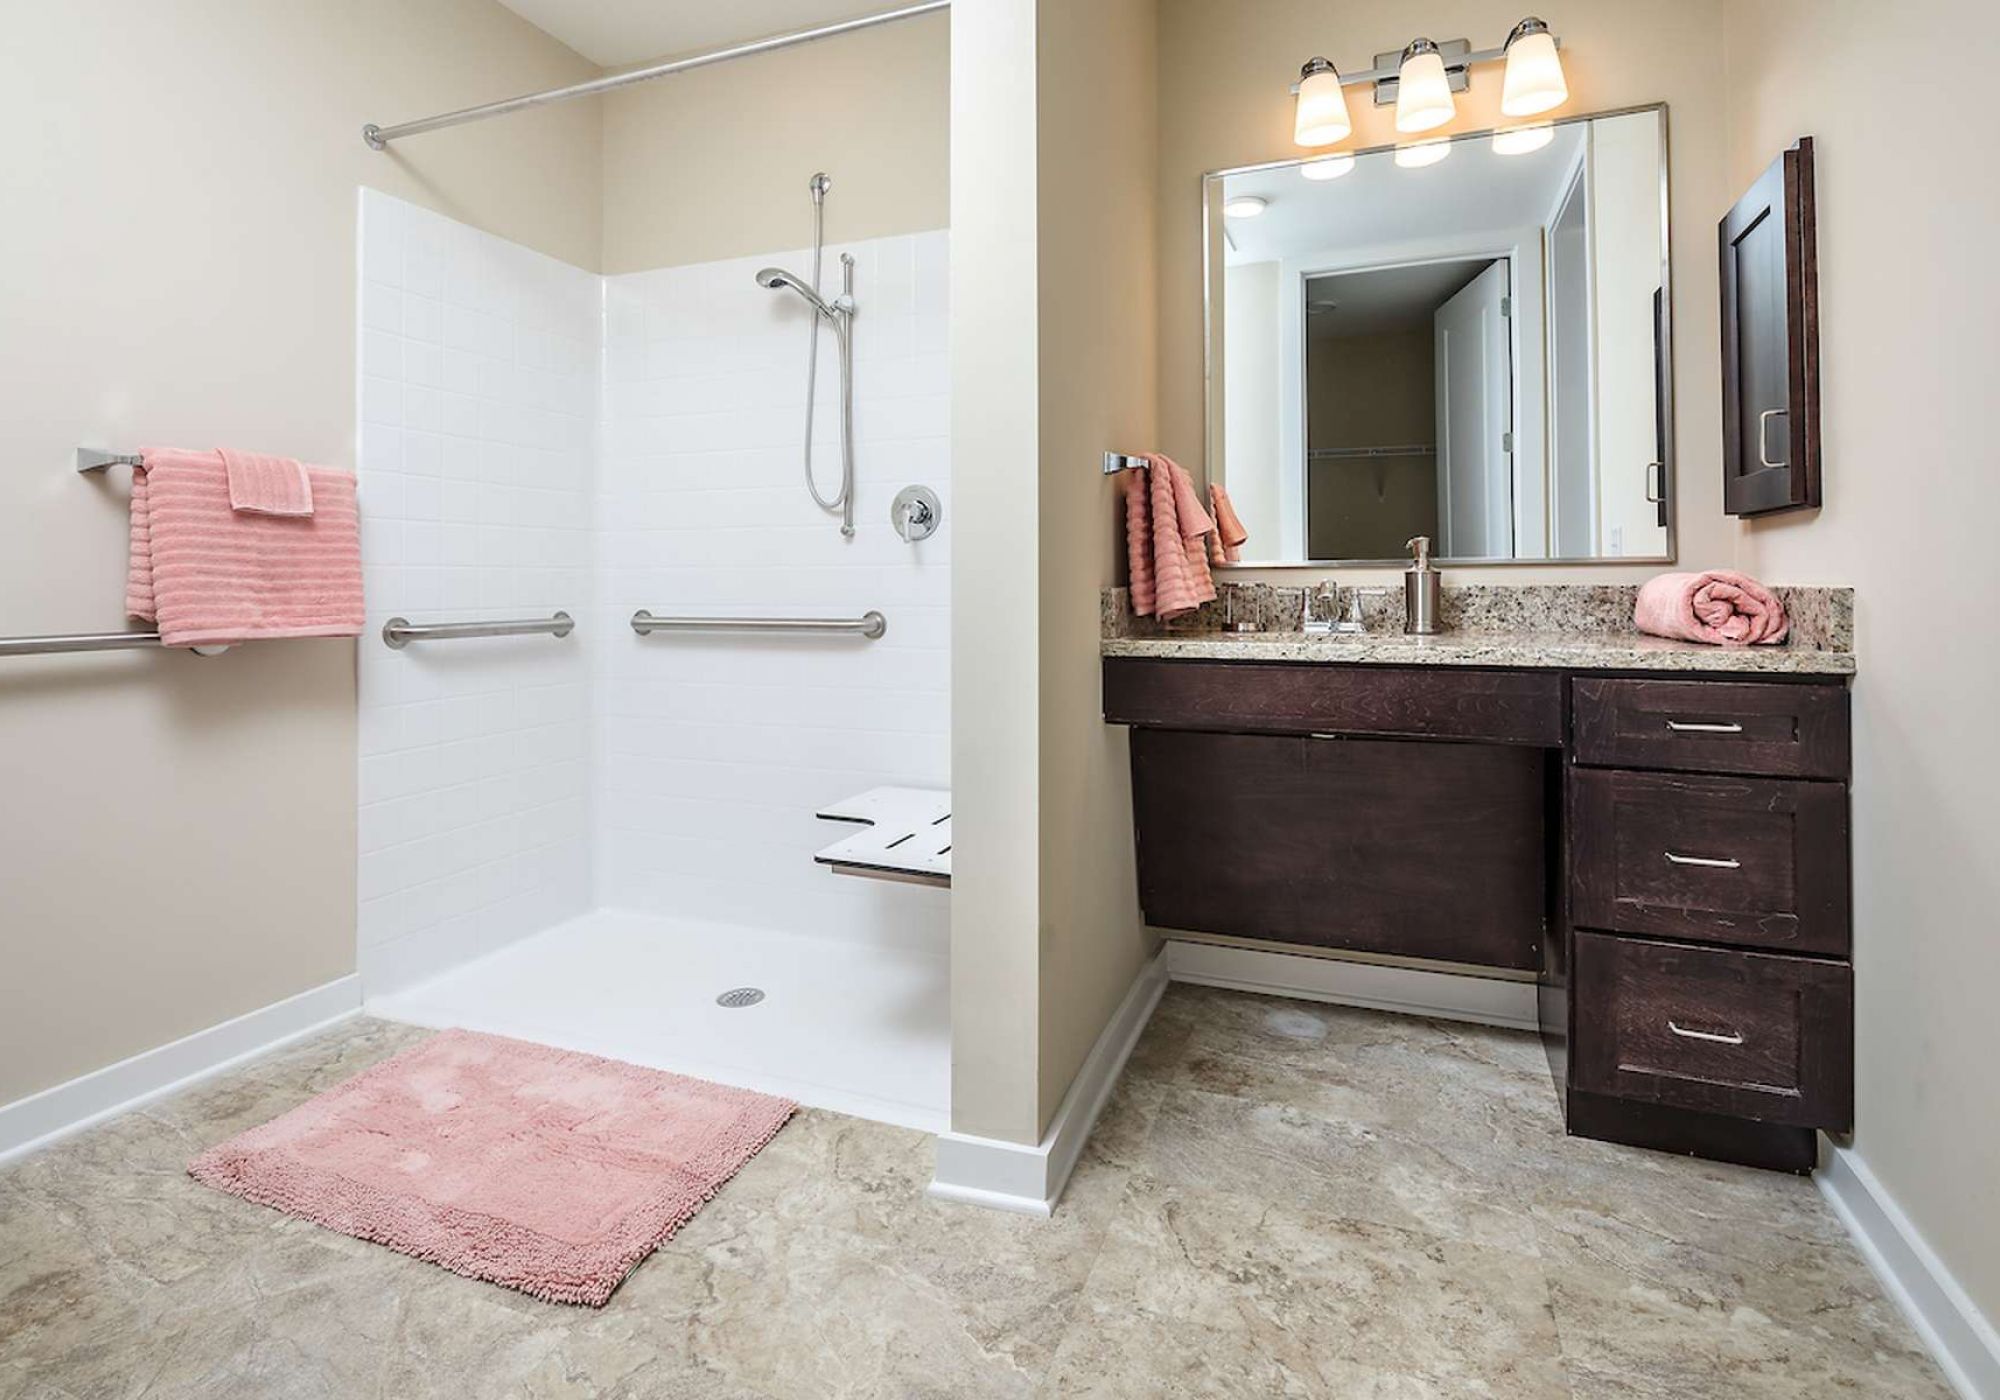 The Claiborne at West Lake senior living community bathroom showing accessibility features including handrails, lower sink height, and zero-entry shower